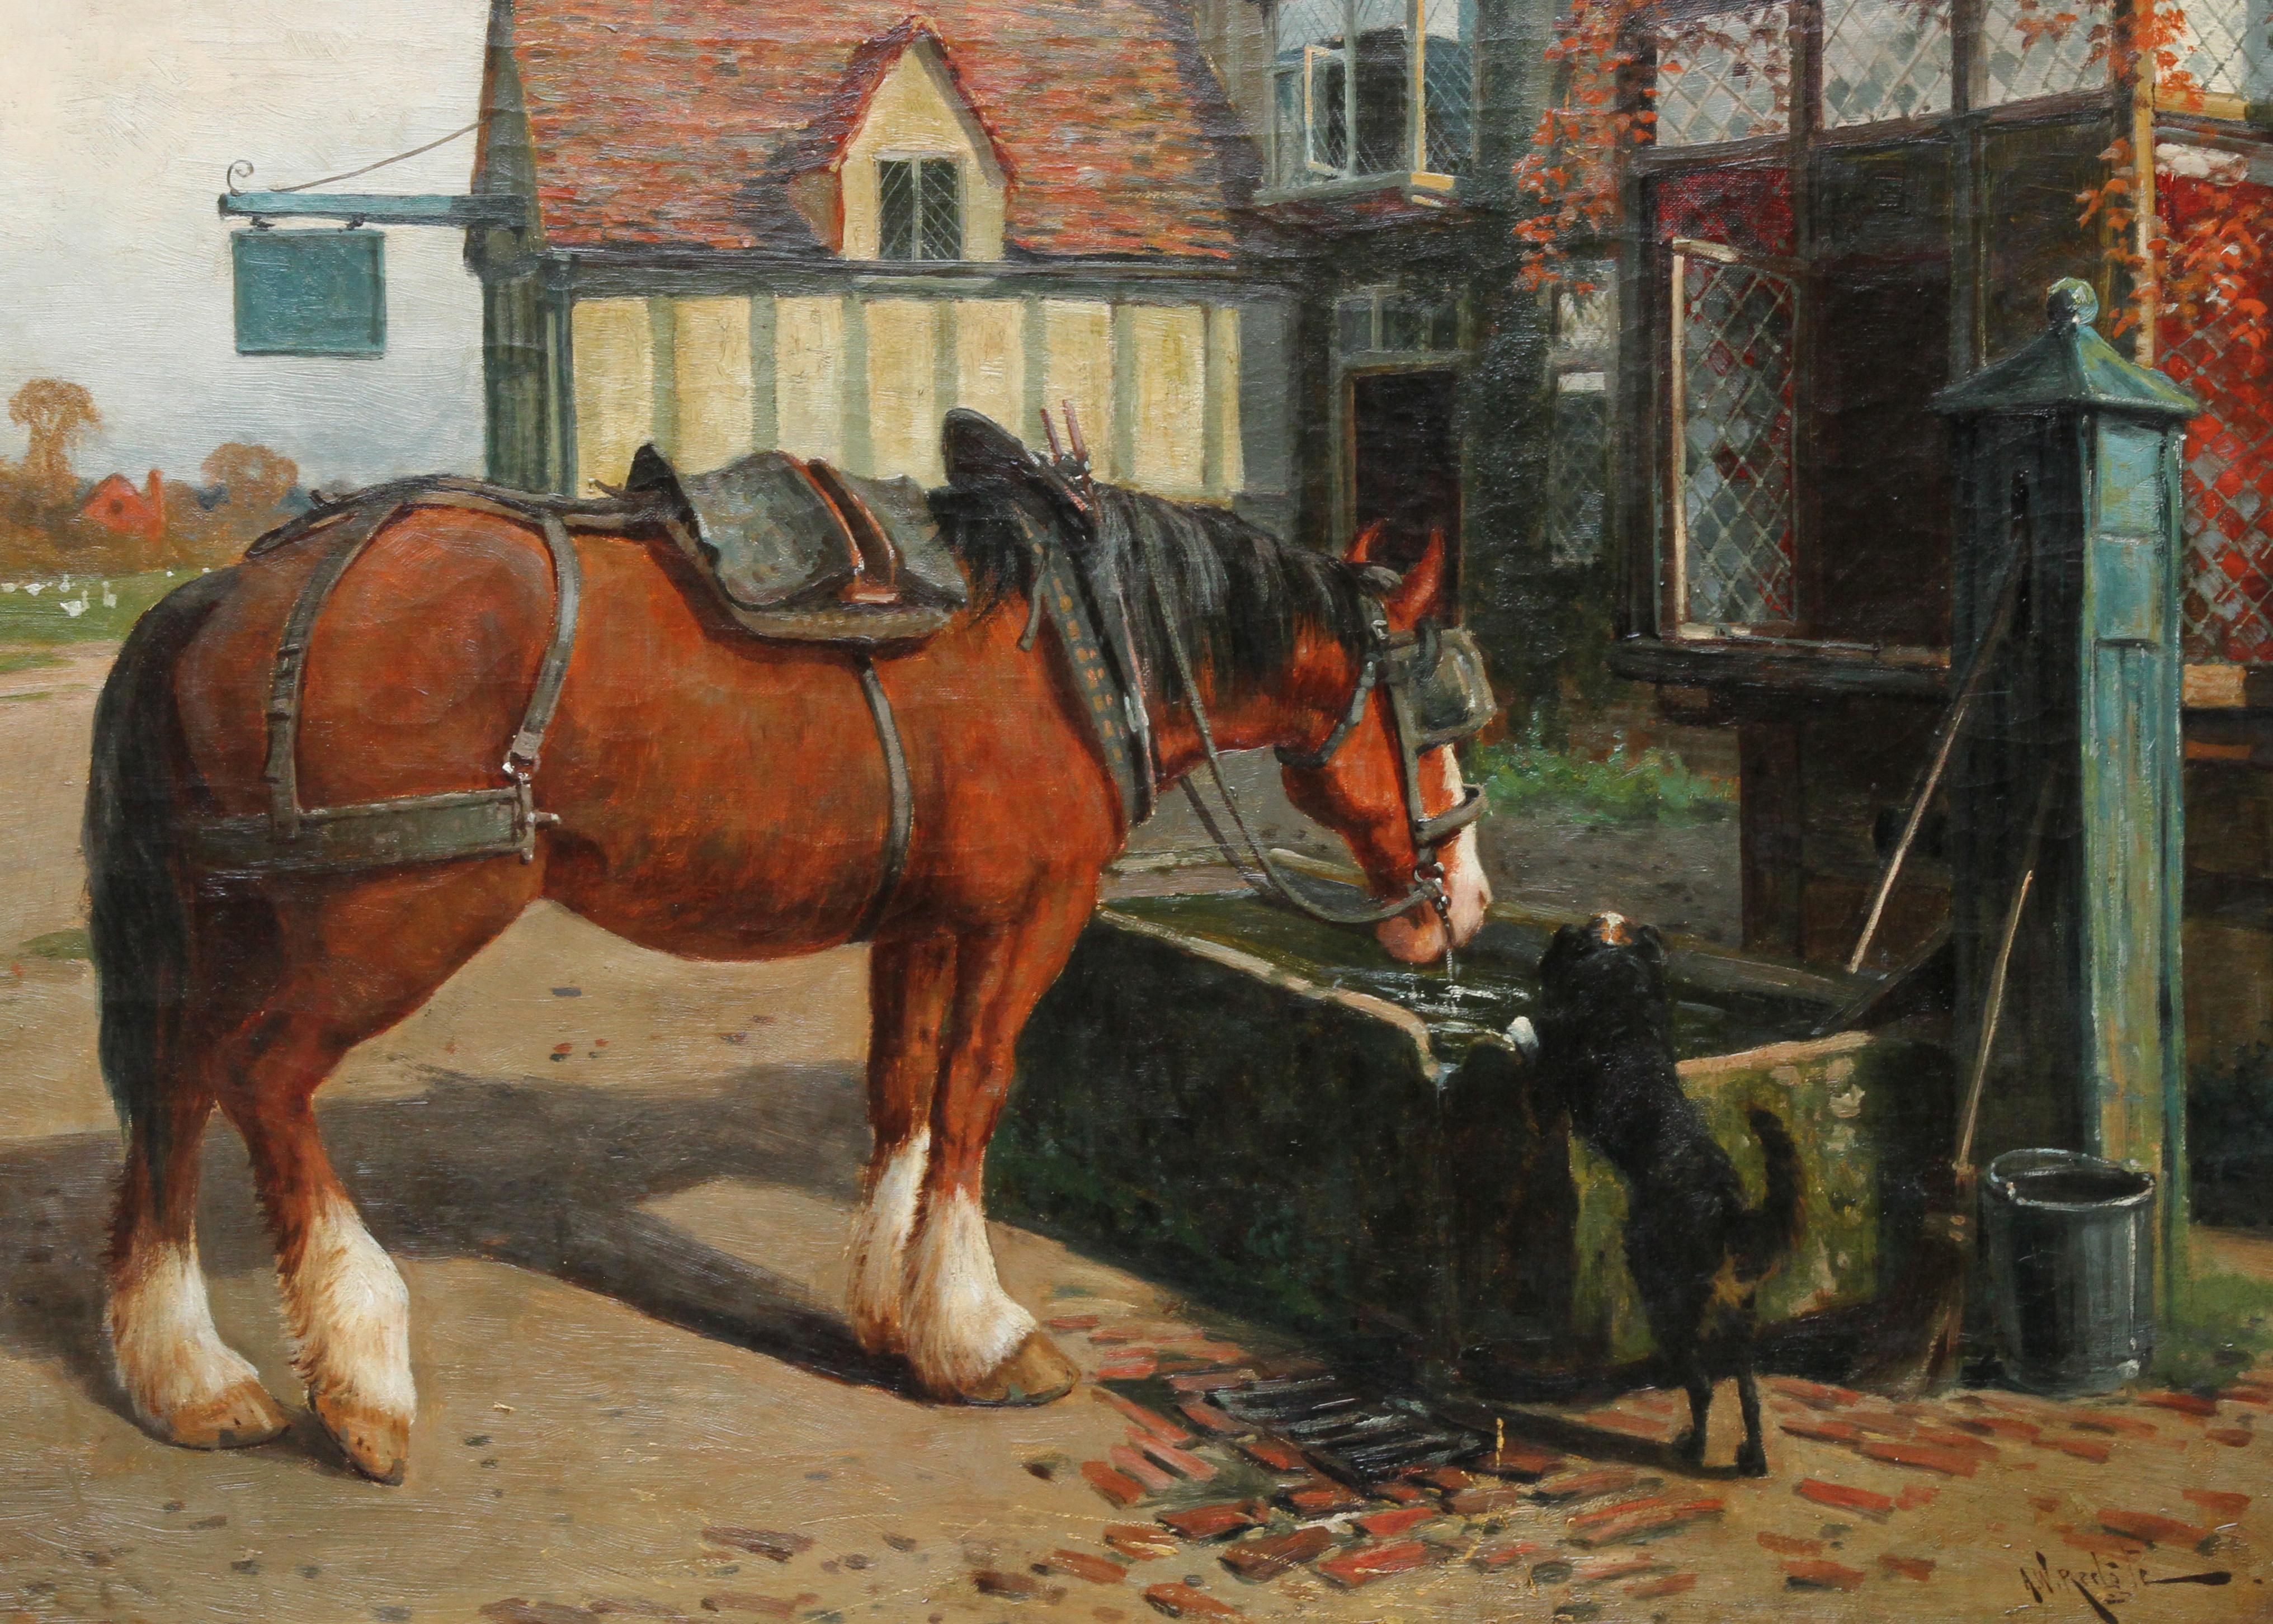 Farm Horse at Trough before a Tavern - British Victorian animal art oil painting - Realist Painting by Arthur William Redgate